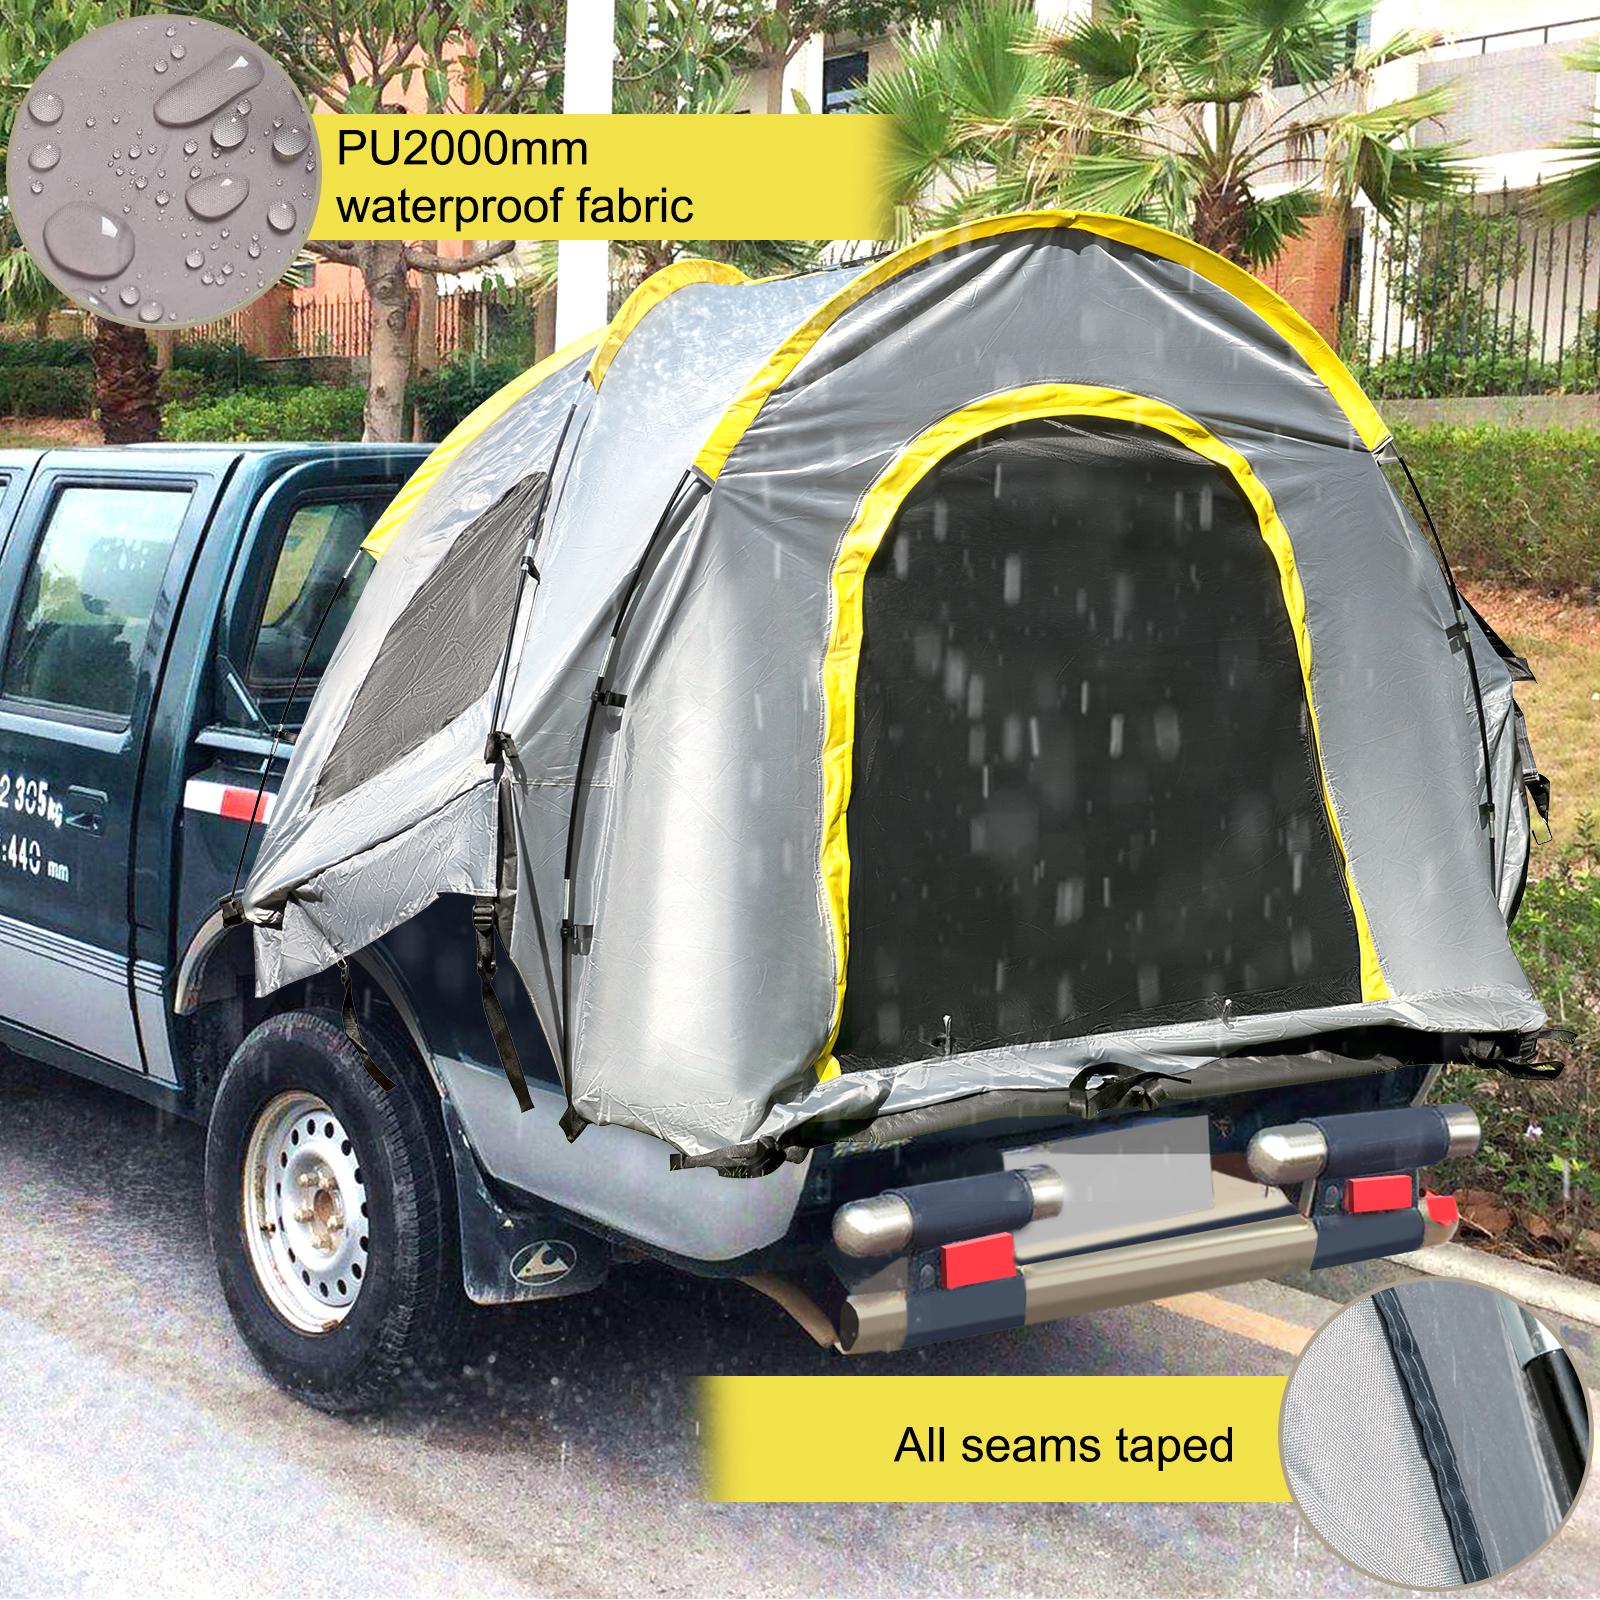 VEVOR Truck Tent 6.5鈥? Truck Bed Tent, Pickup Tent for Full Size Truck,  Waterproof Truck Camper, 2-Person Sleeping Capacity, Mesh Windows, Easy  To Setup Truck Tents For Camping, Hiking, Fishing